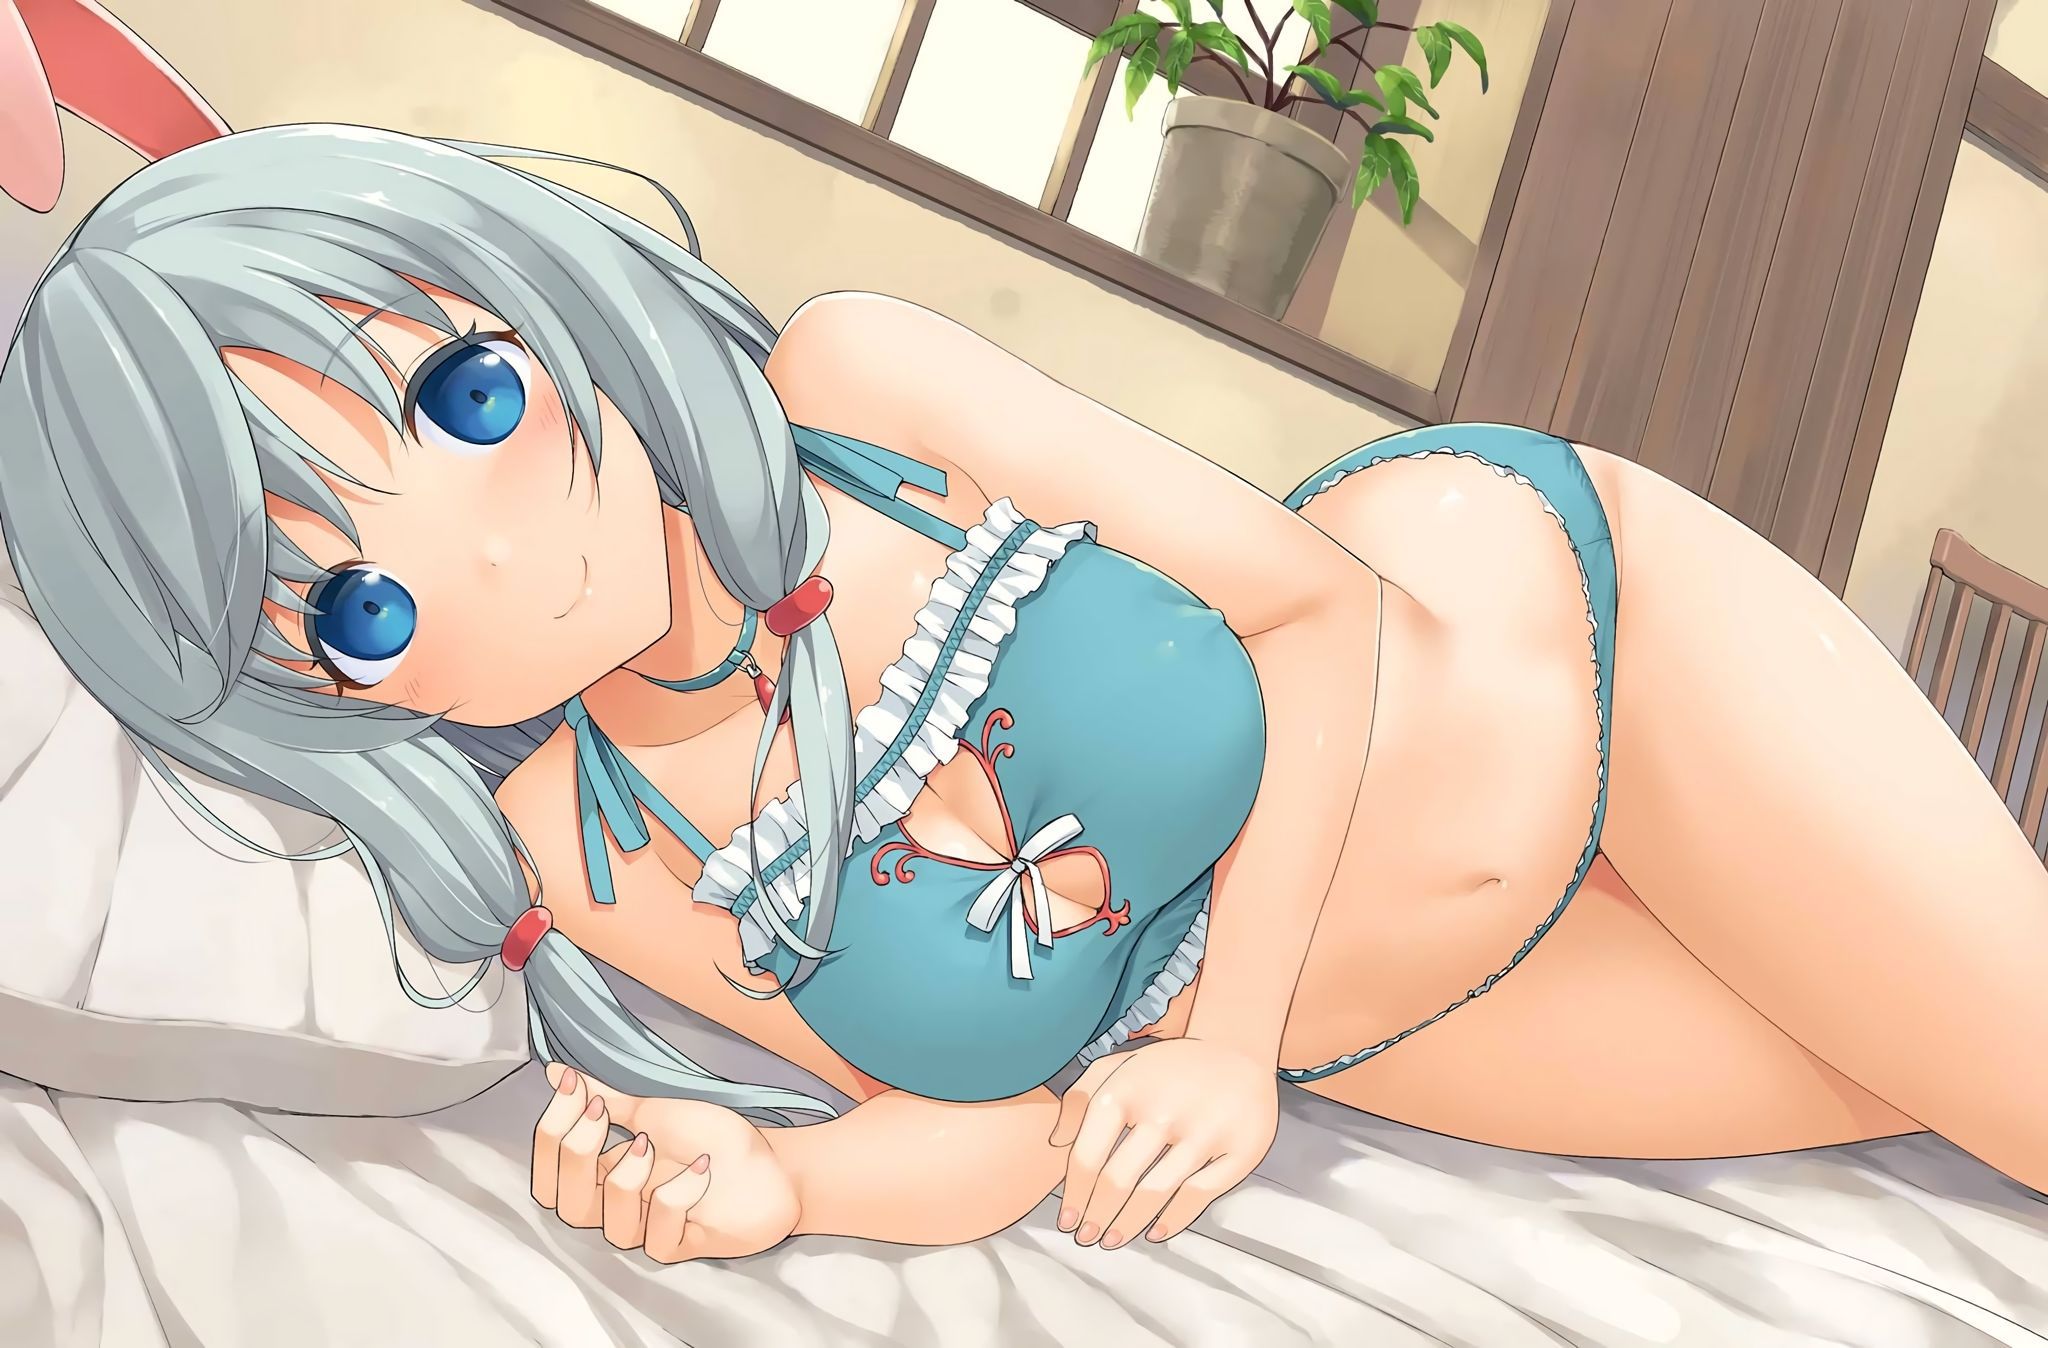 Erotic anime summary erotic image of a girl who is pretty good underwear [secondary erotic] 18